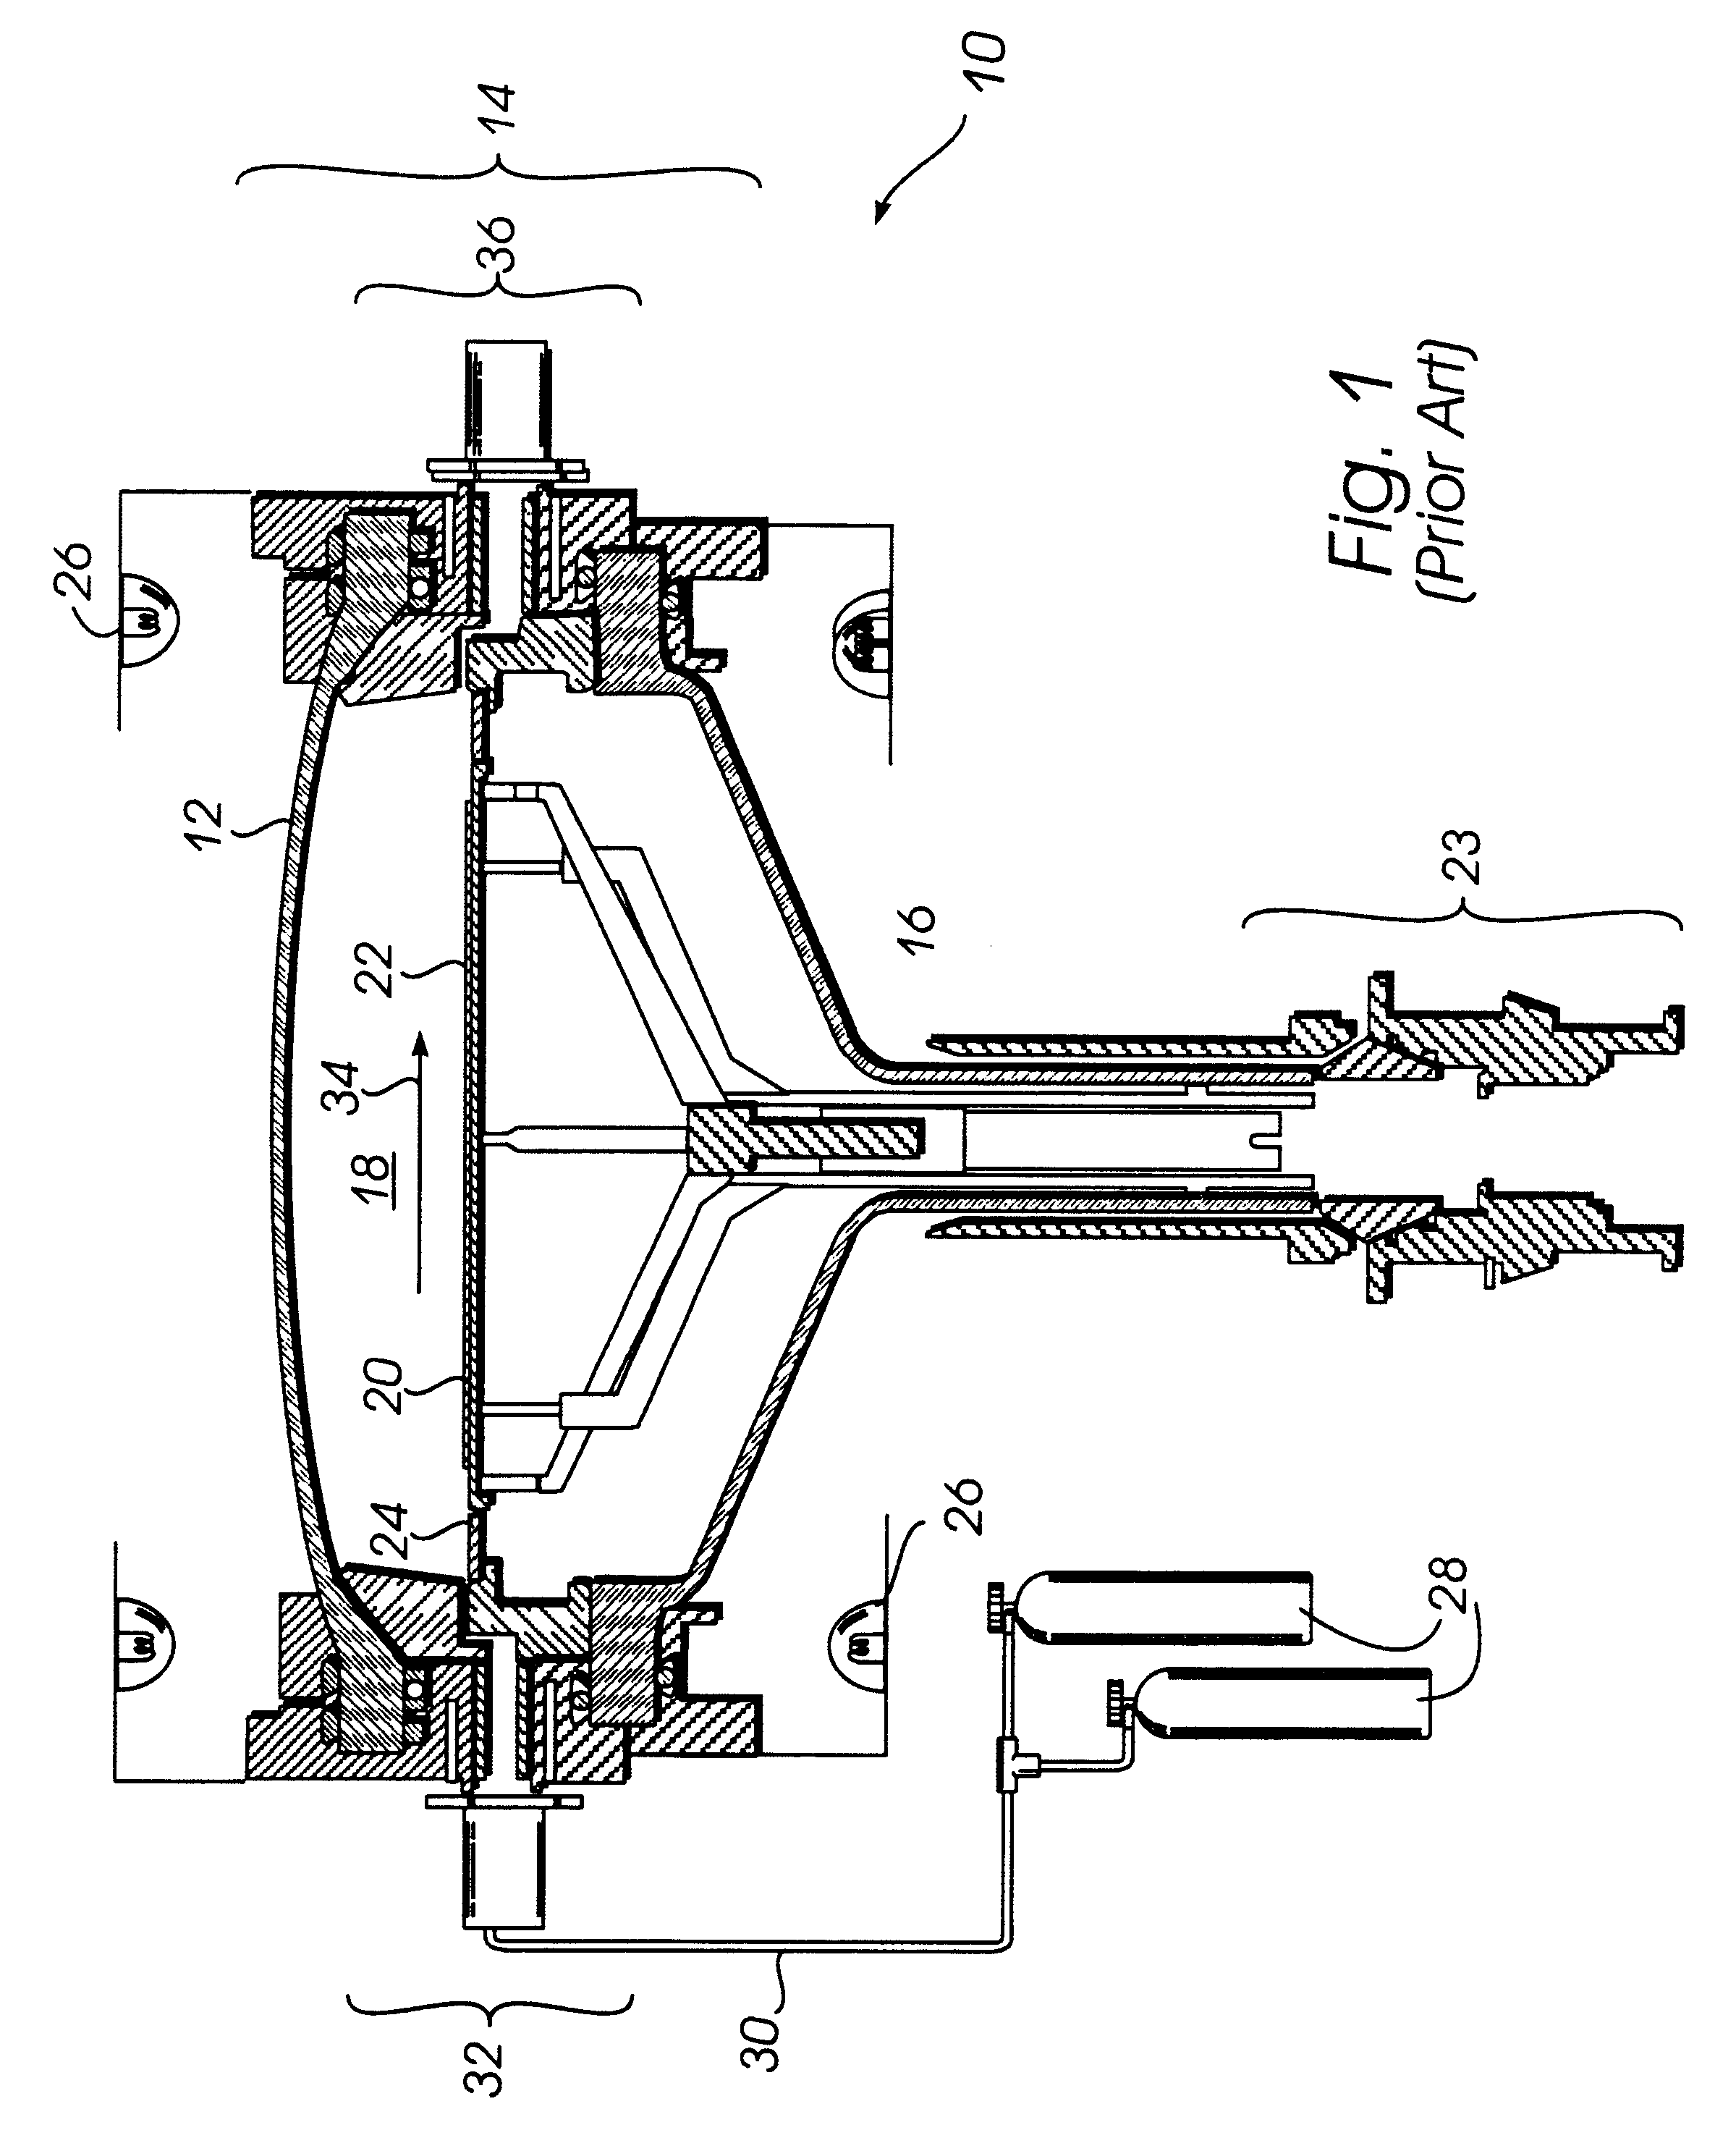 Gas inlets for wafer processing chamber